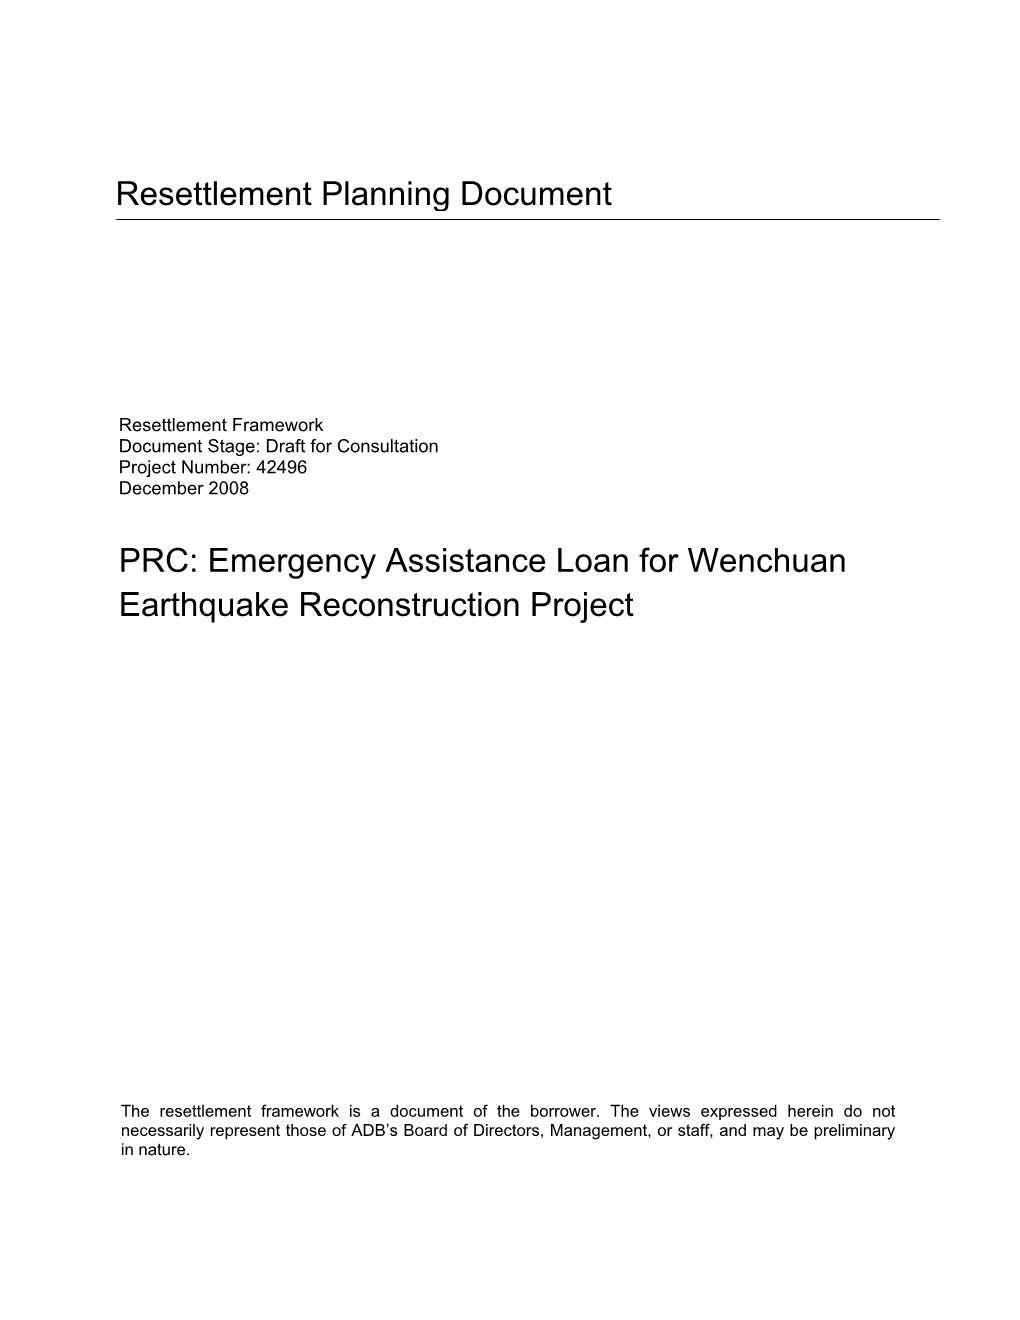 Emergency Assistance Loan for Wenchuan Earthquake Reconstruction Project